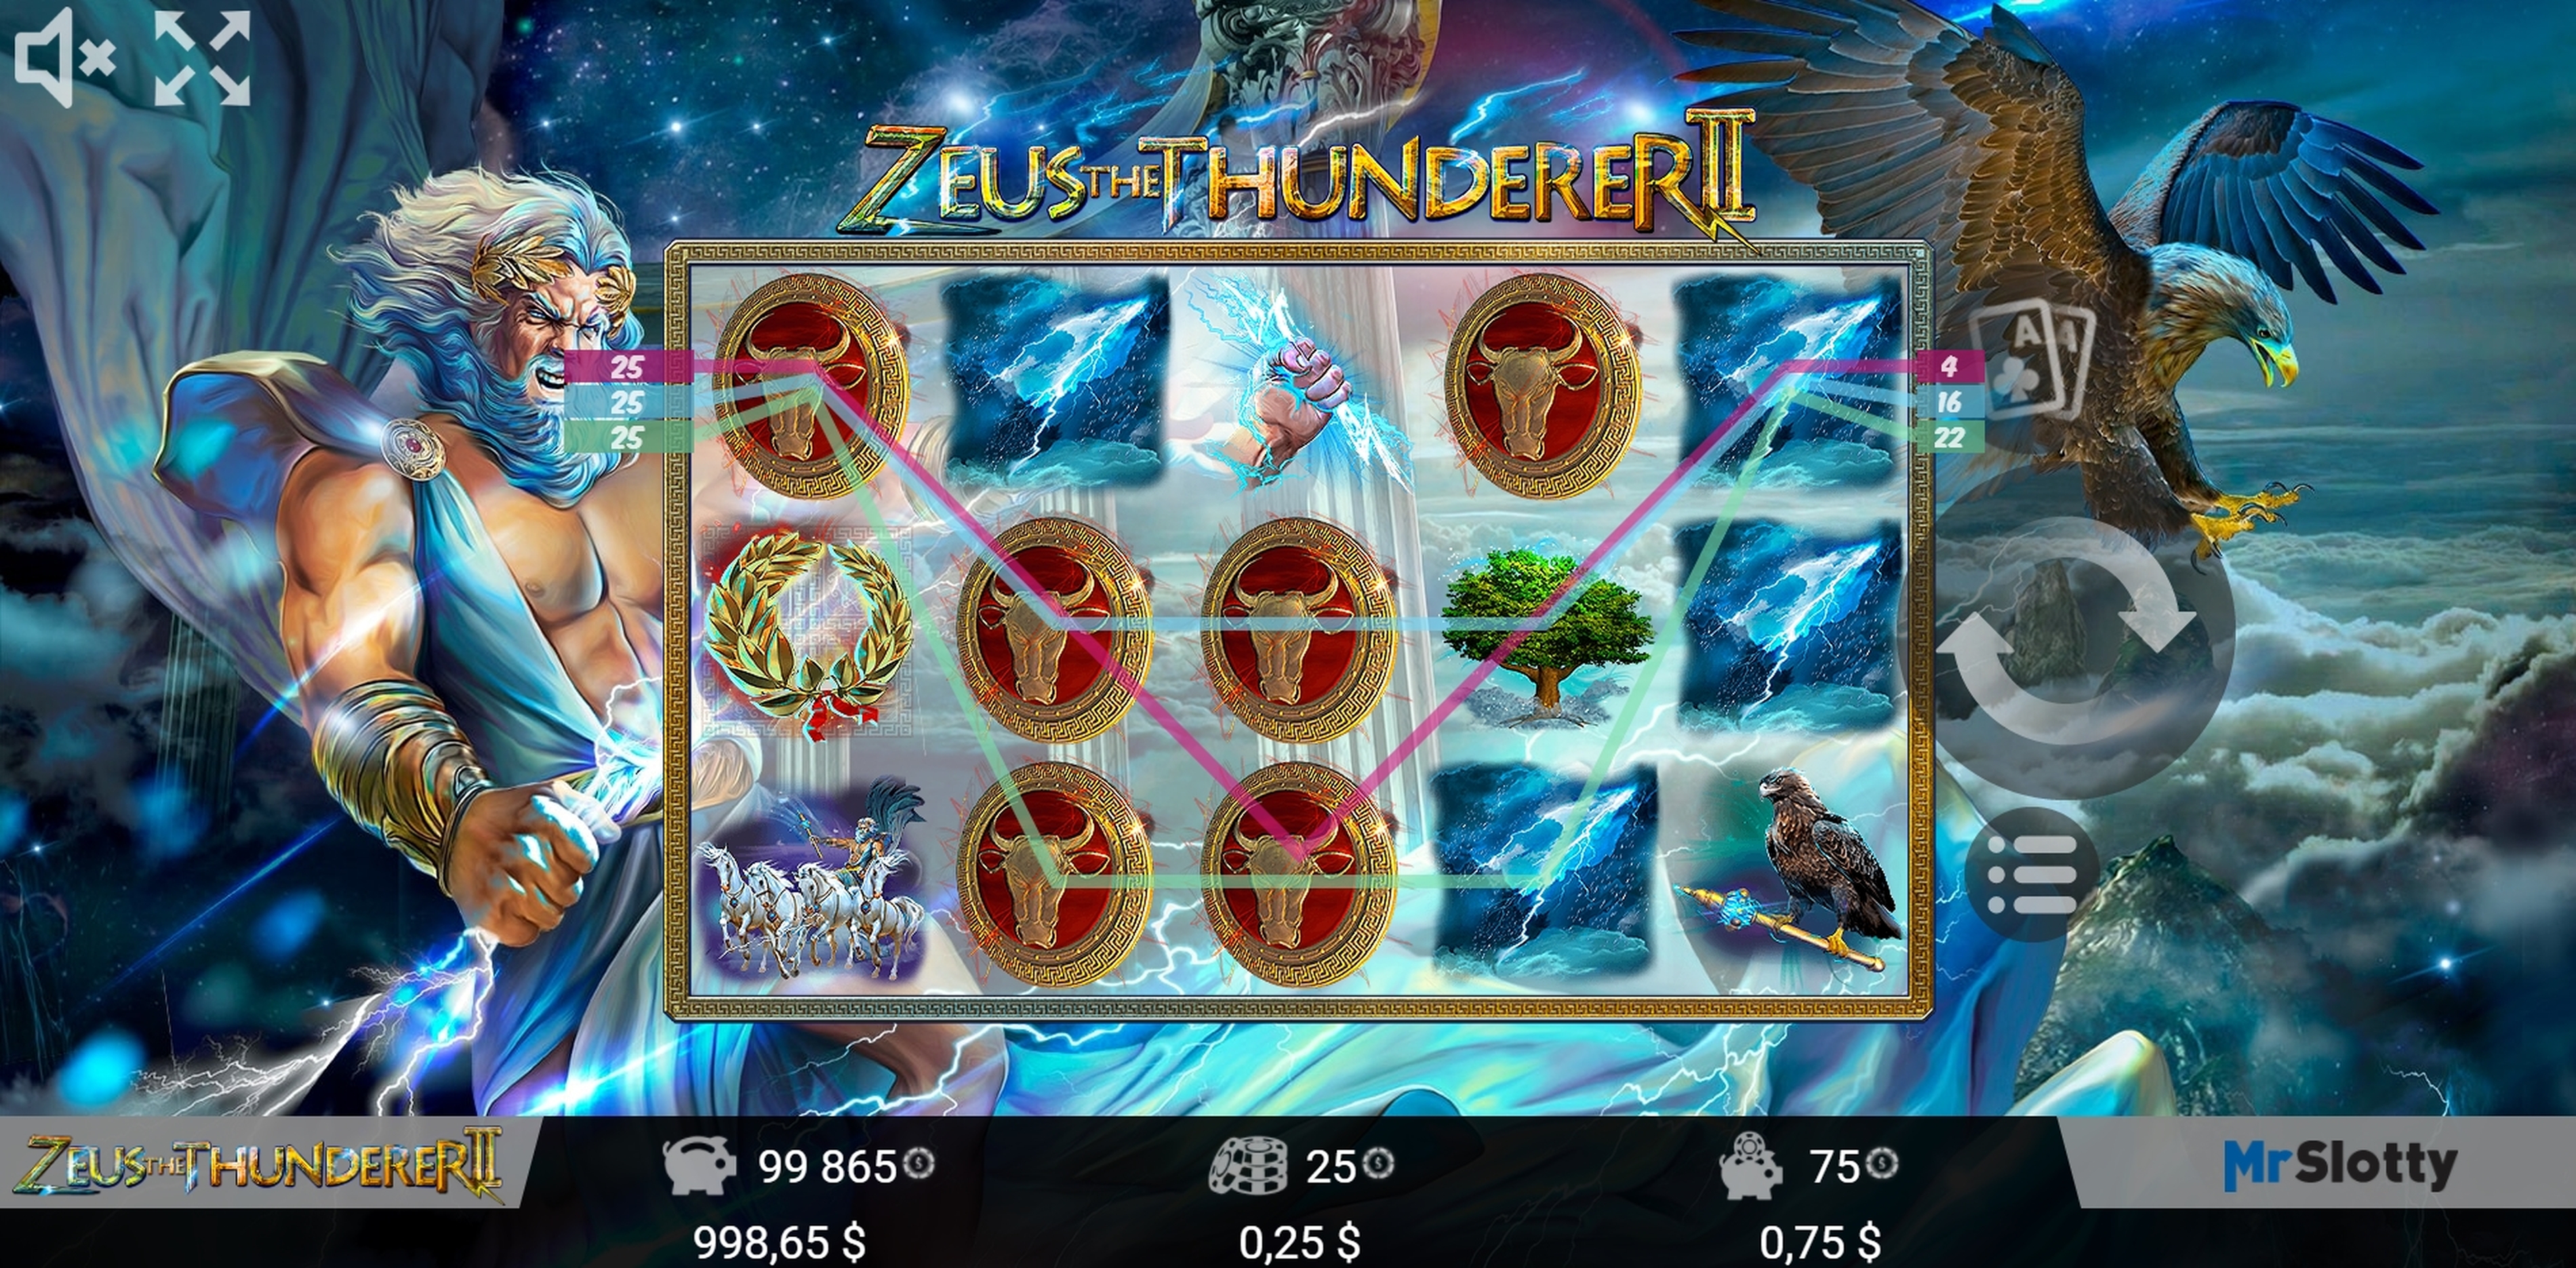 Win Money in Zeus the Thunderer II Free Slot Game by Mr Slotty